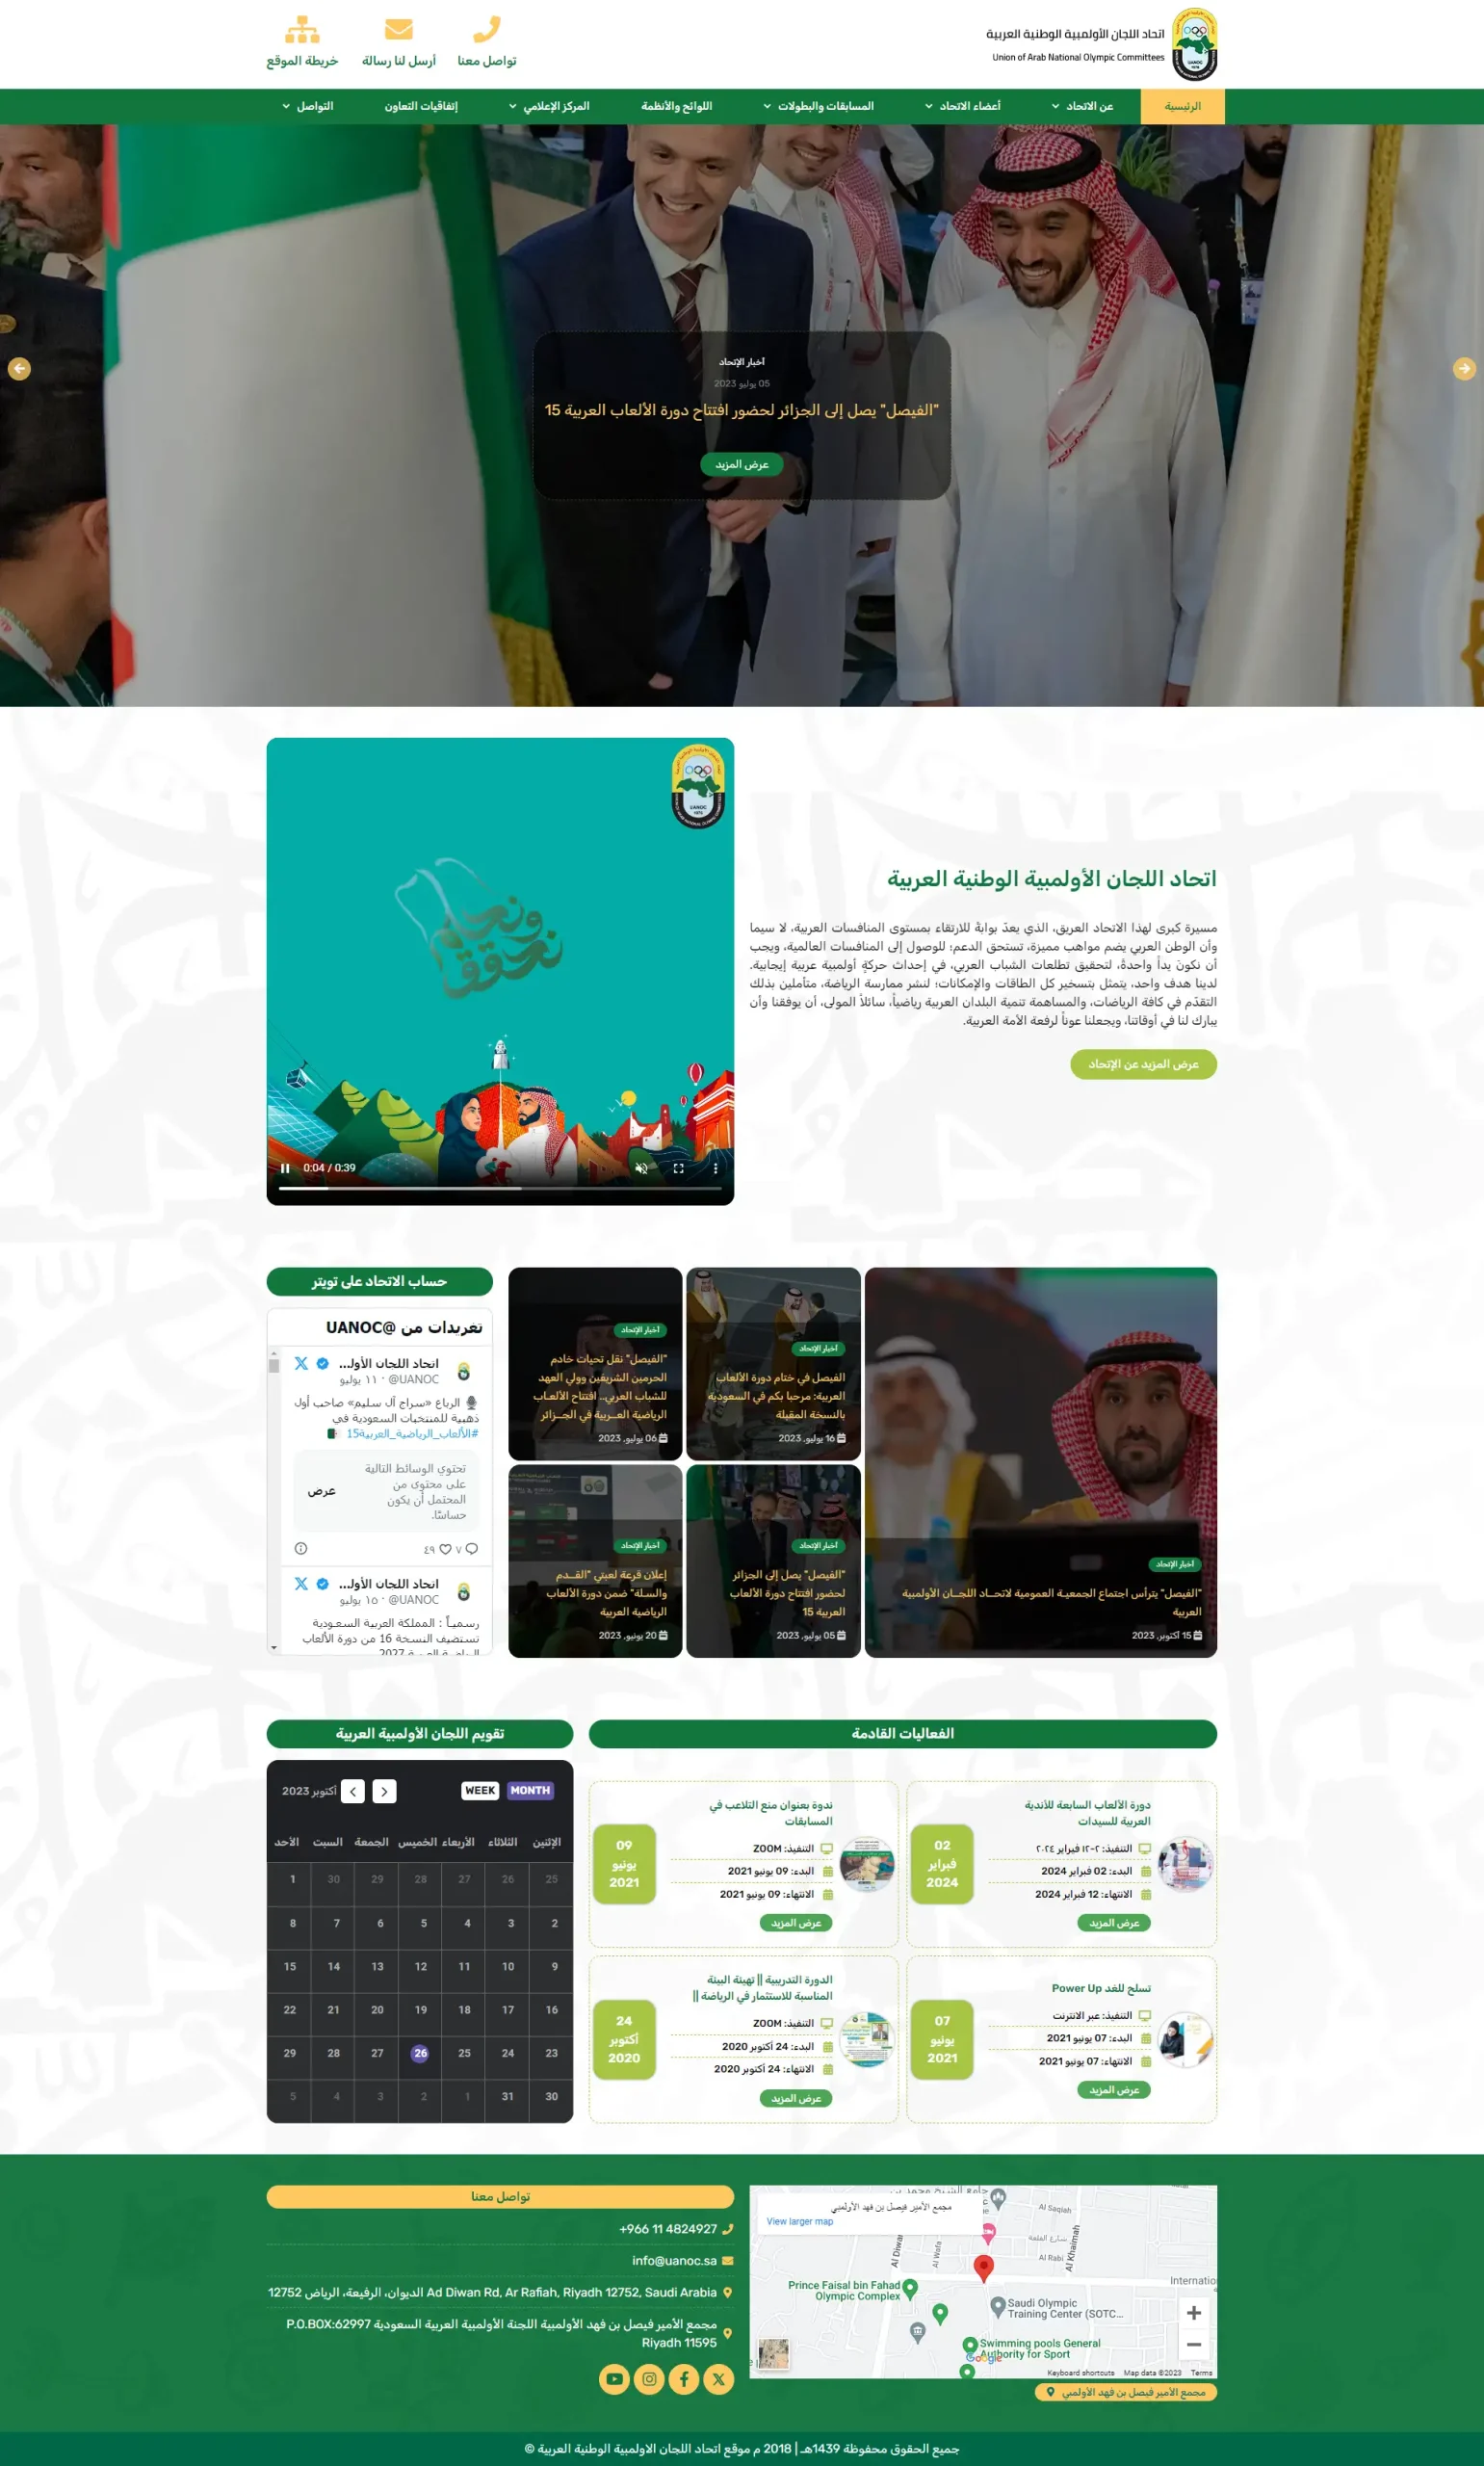 Union of the Arab National Olympic Committee Website